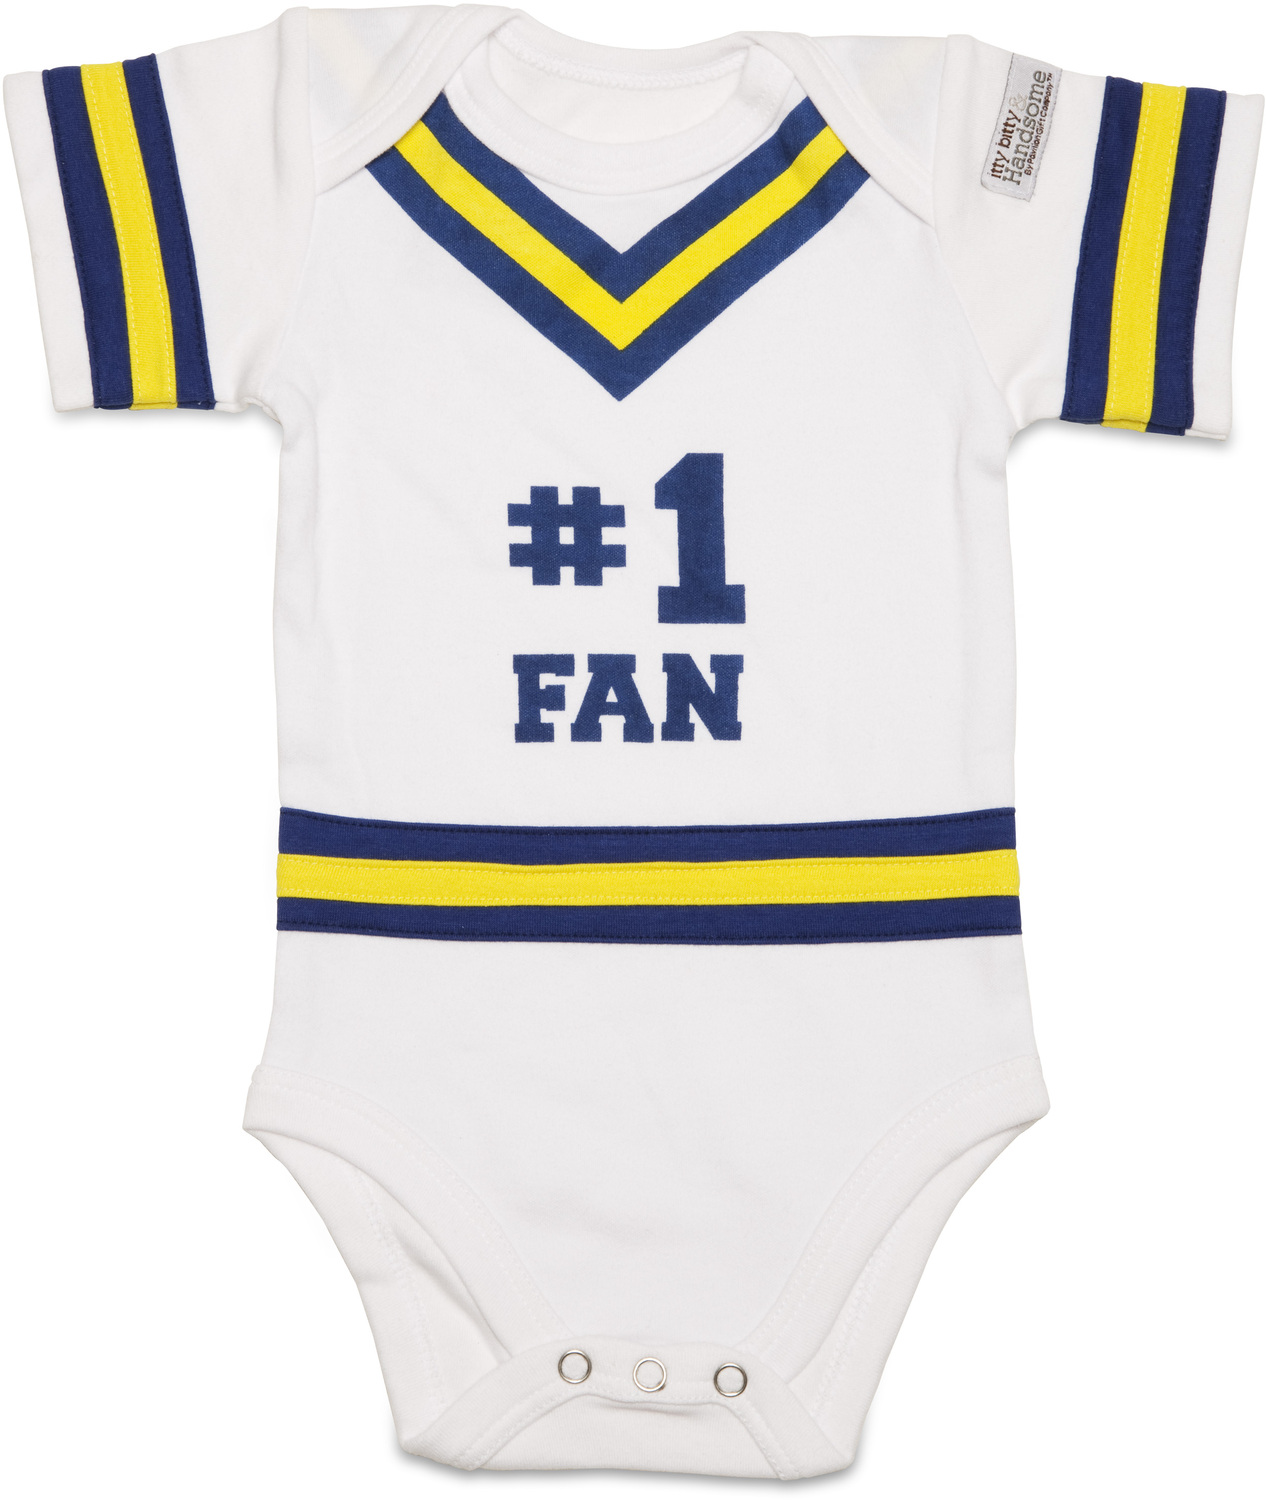 Blue & Gold by Itty Bitty & Pretty - Blue & Gold - 0-6 Months Infant Onesie